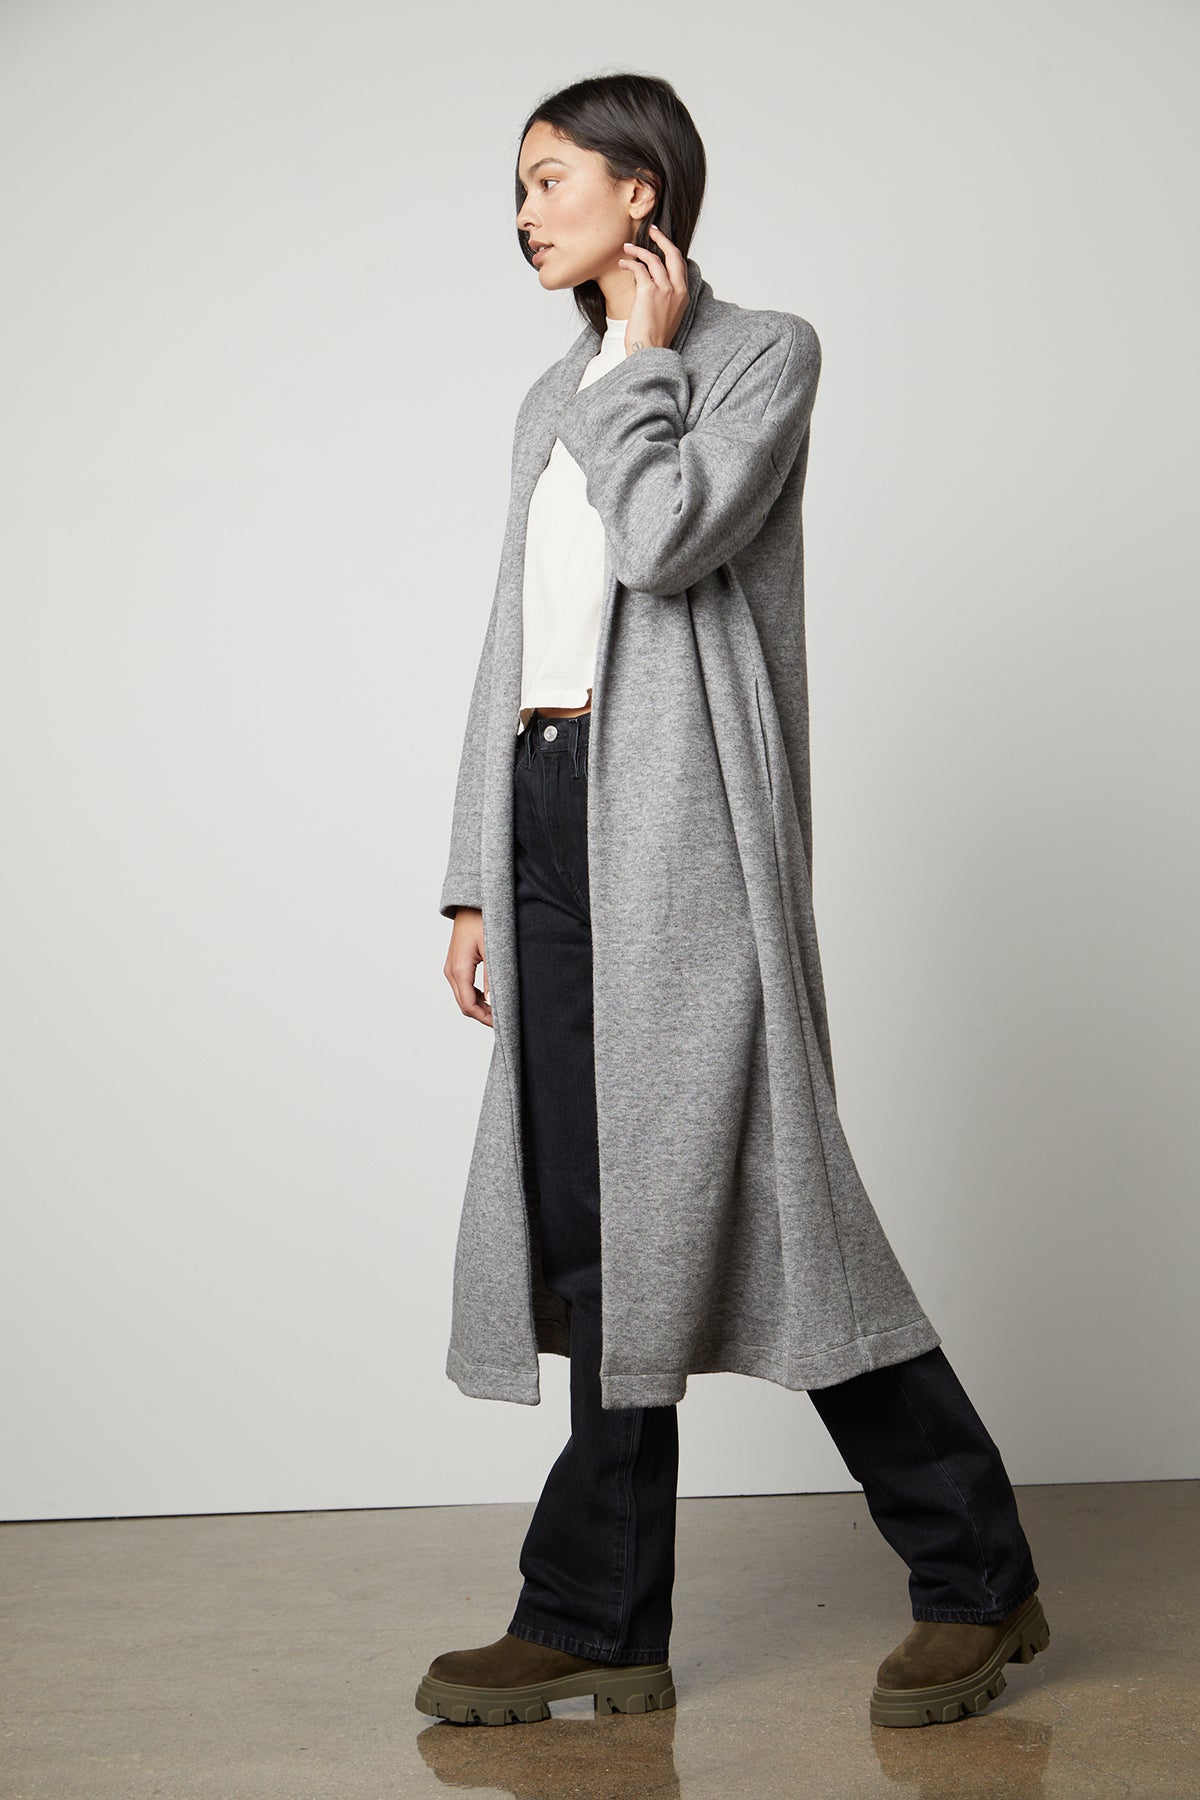 The model is wearing a cozy Velvet by Graham & Spencer Patricia Double Knit Duster Cardigan.-35503544139969